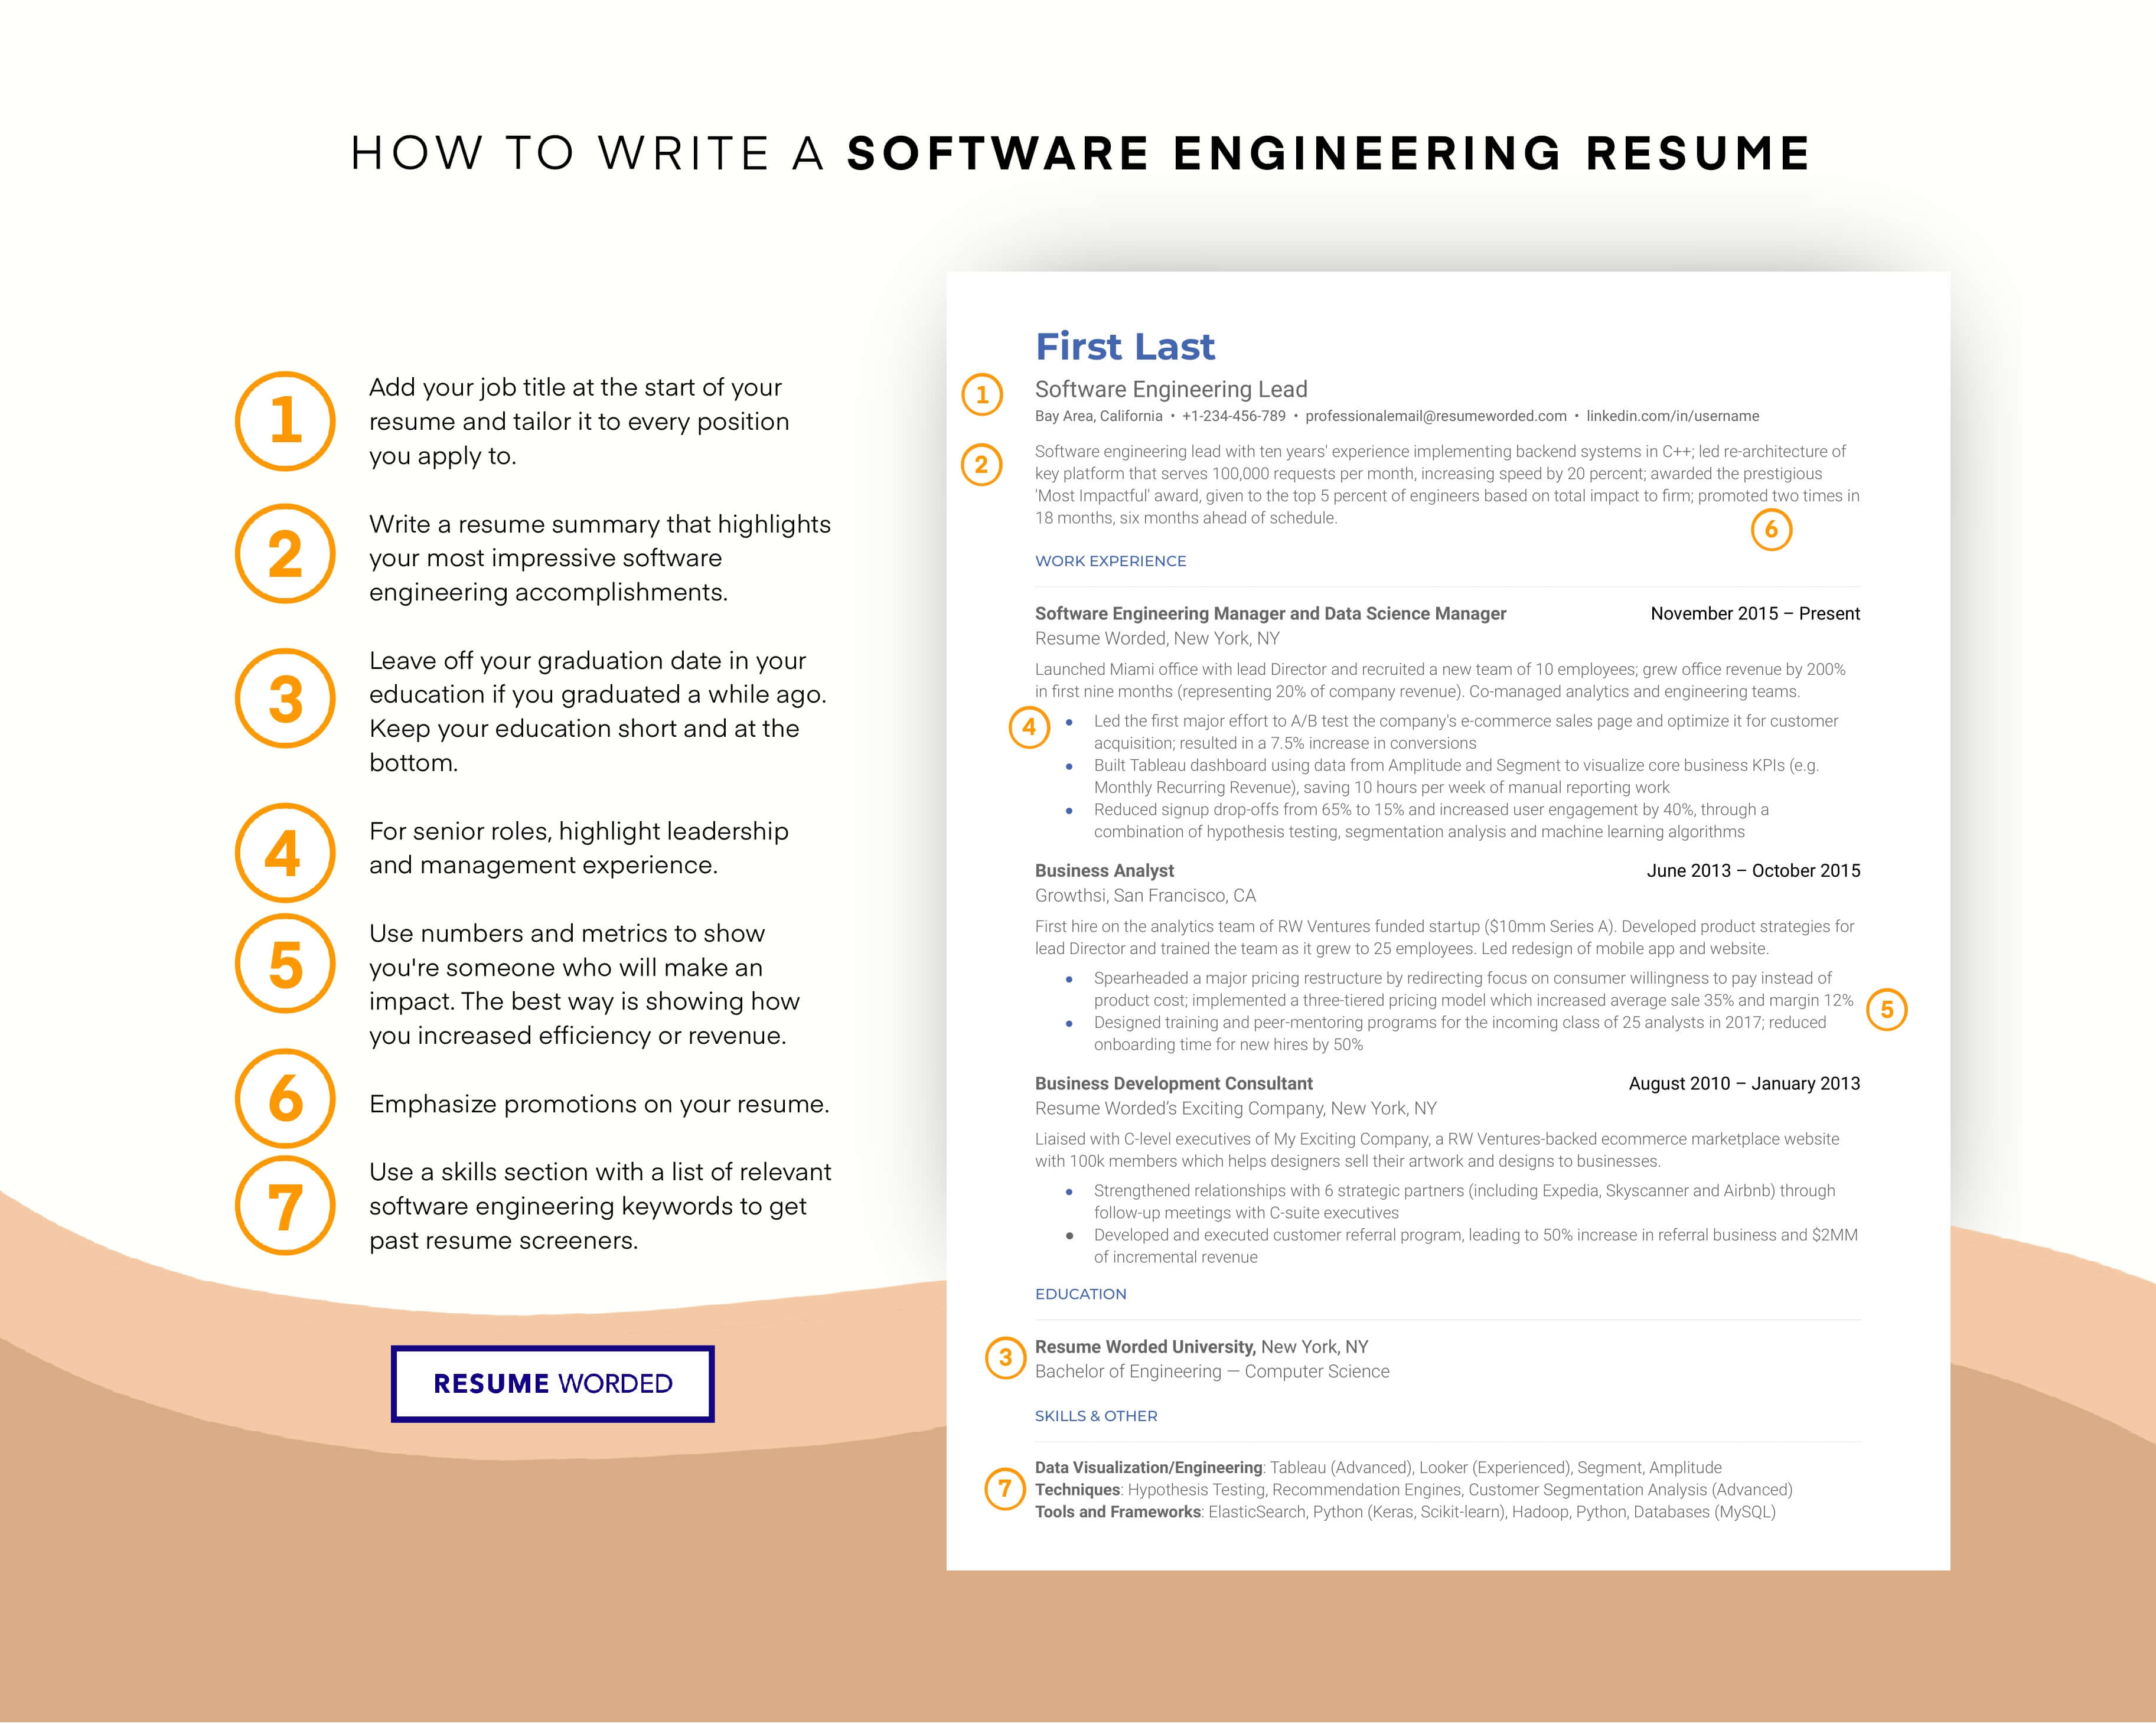 Show your experience with different programming languages - Experienced Software Engineer CV